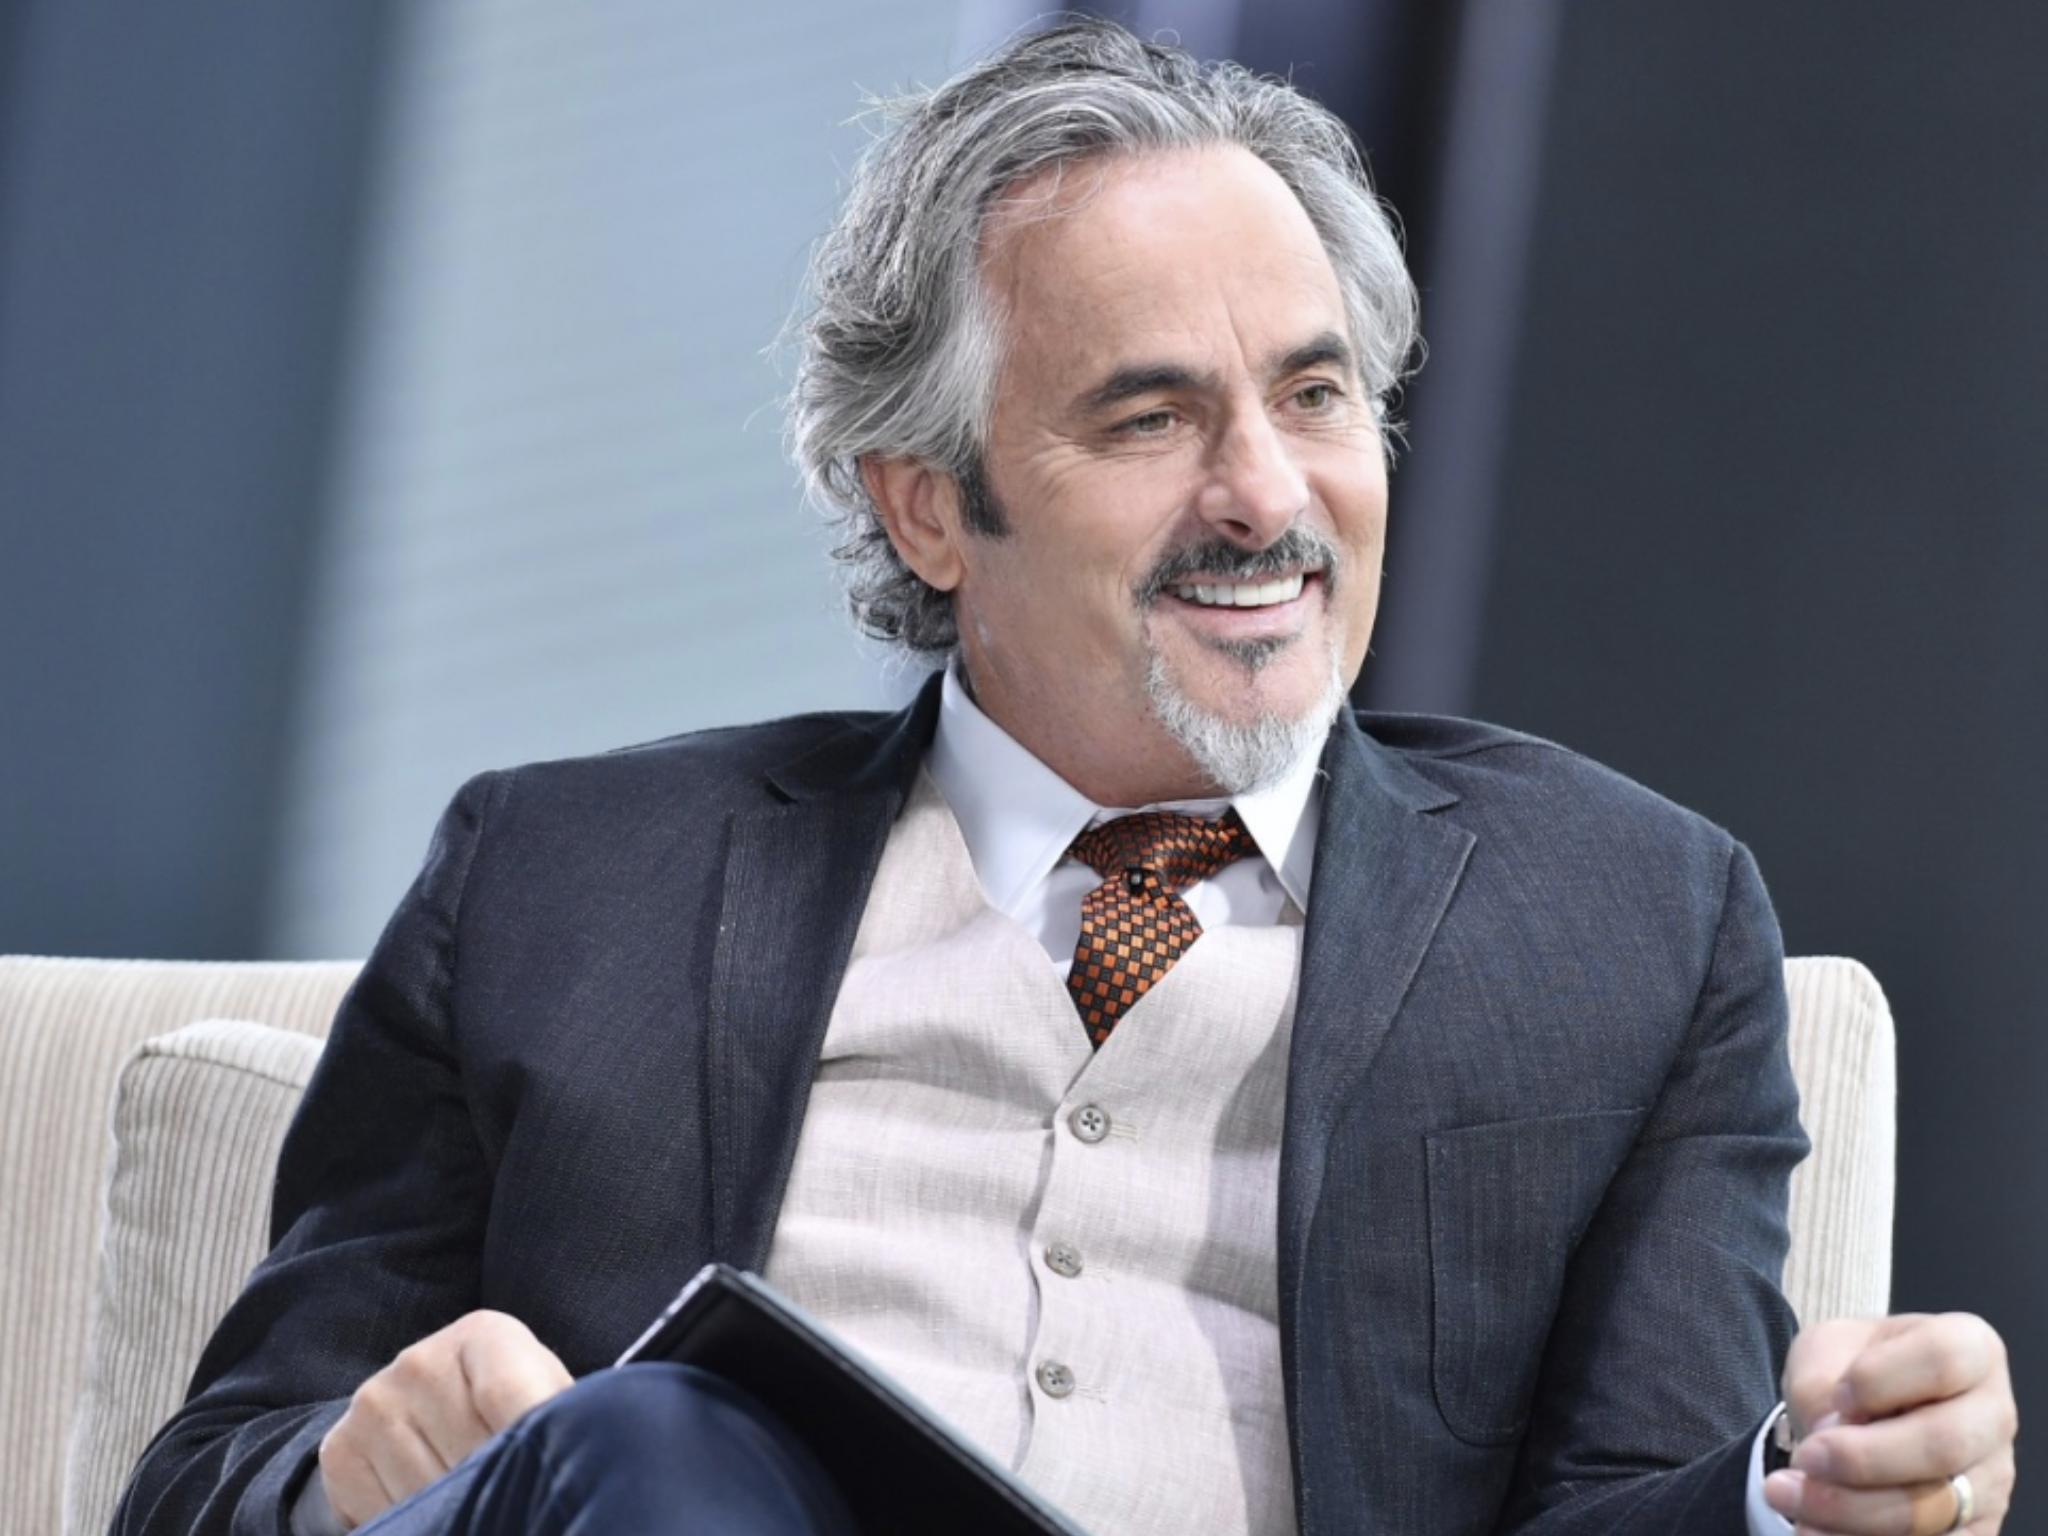 Report David Feherty to join LIV Golf after leaving NBC